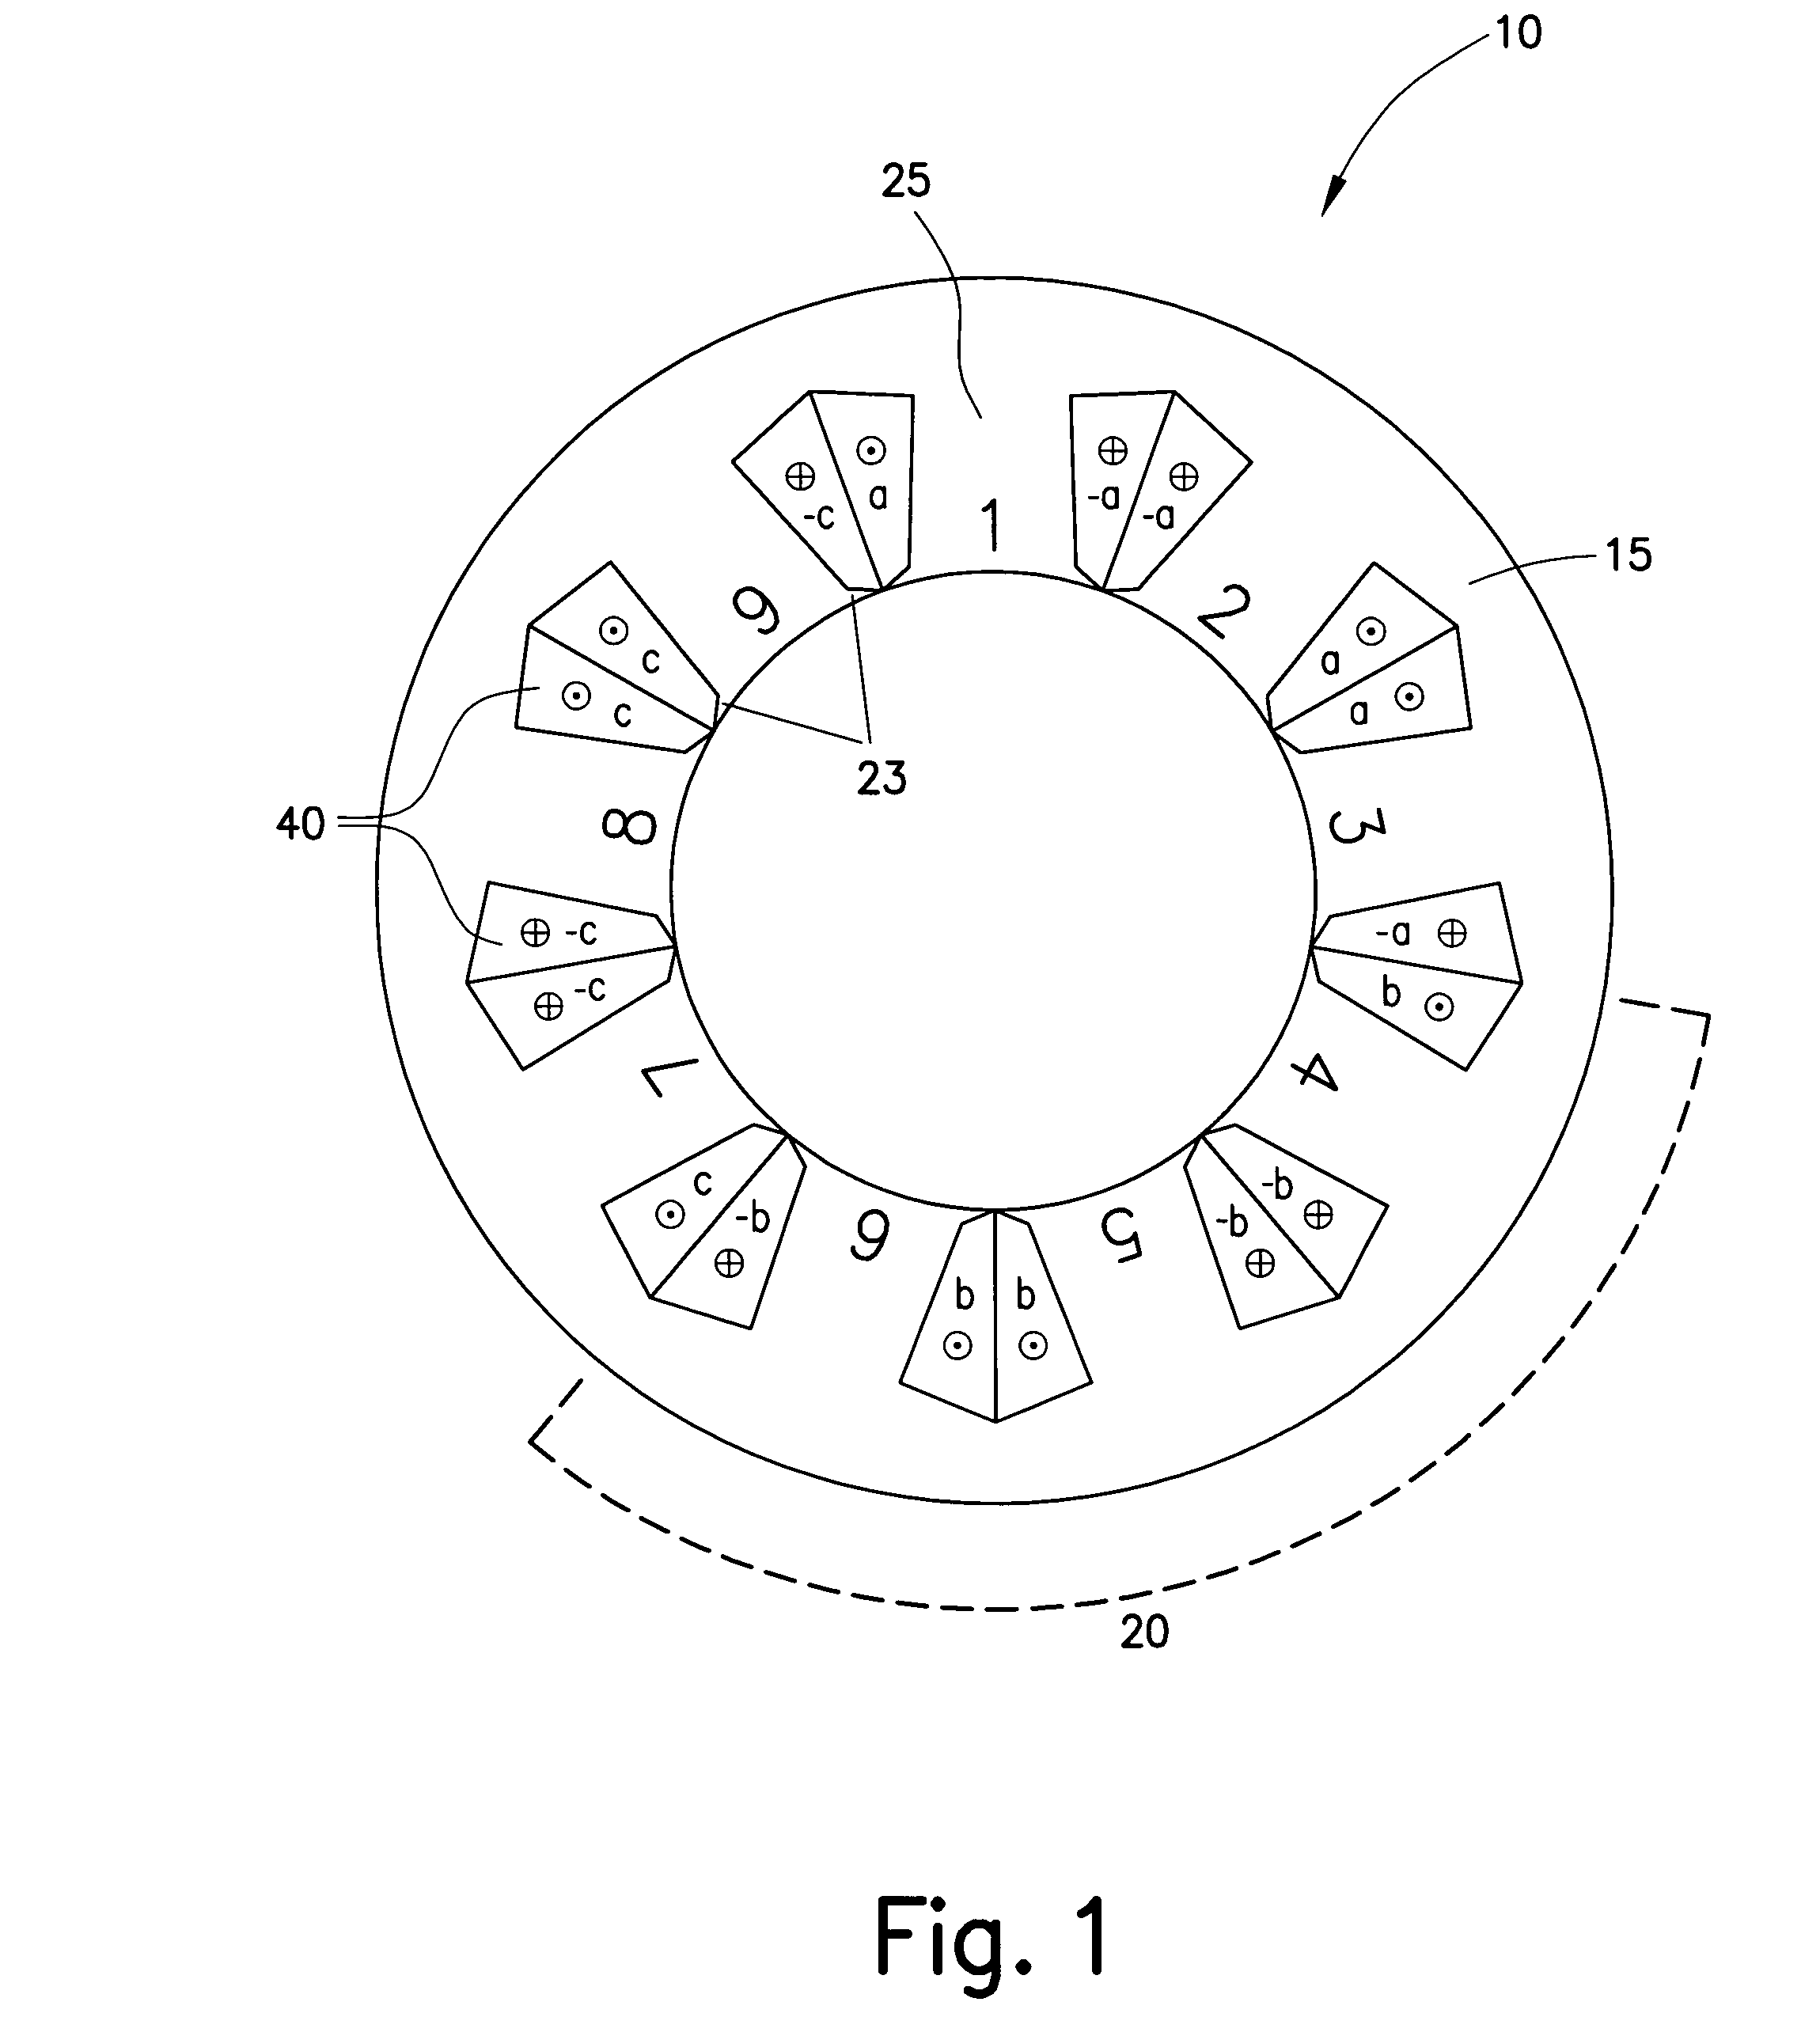 Electrical induction machine and primary part